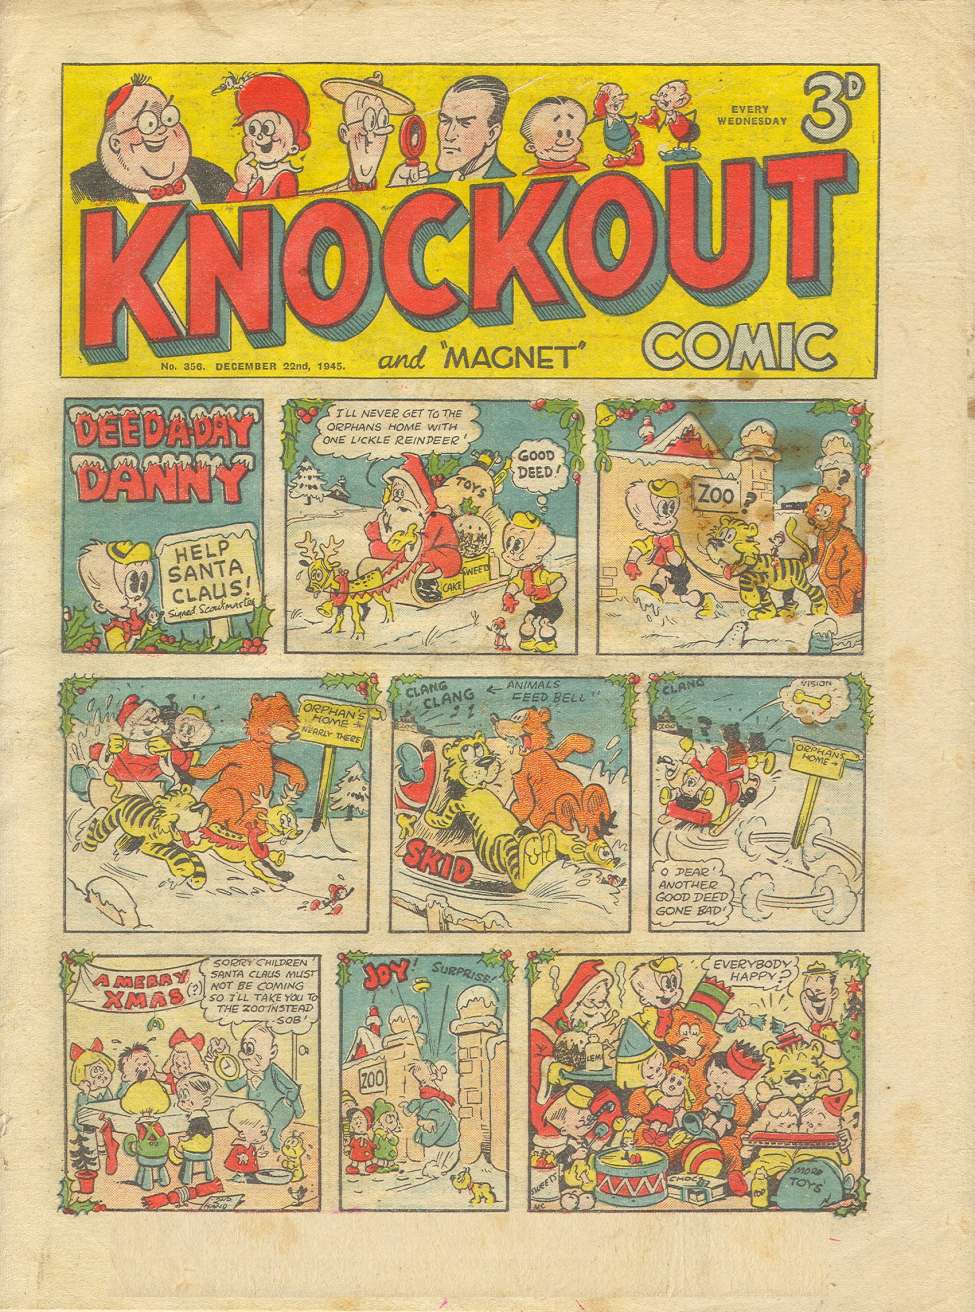 Comic Book Cover For Knockout 356